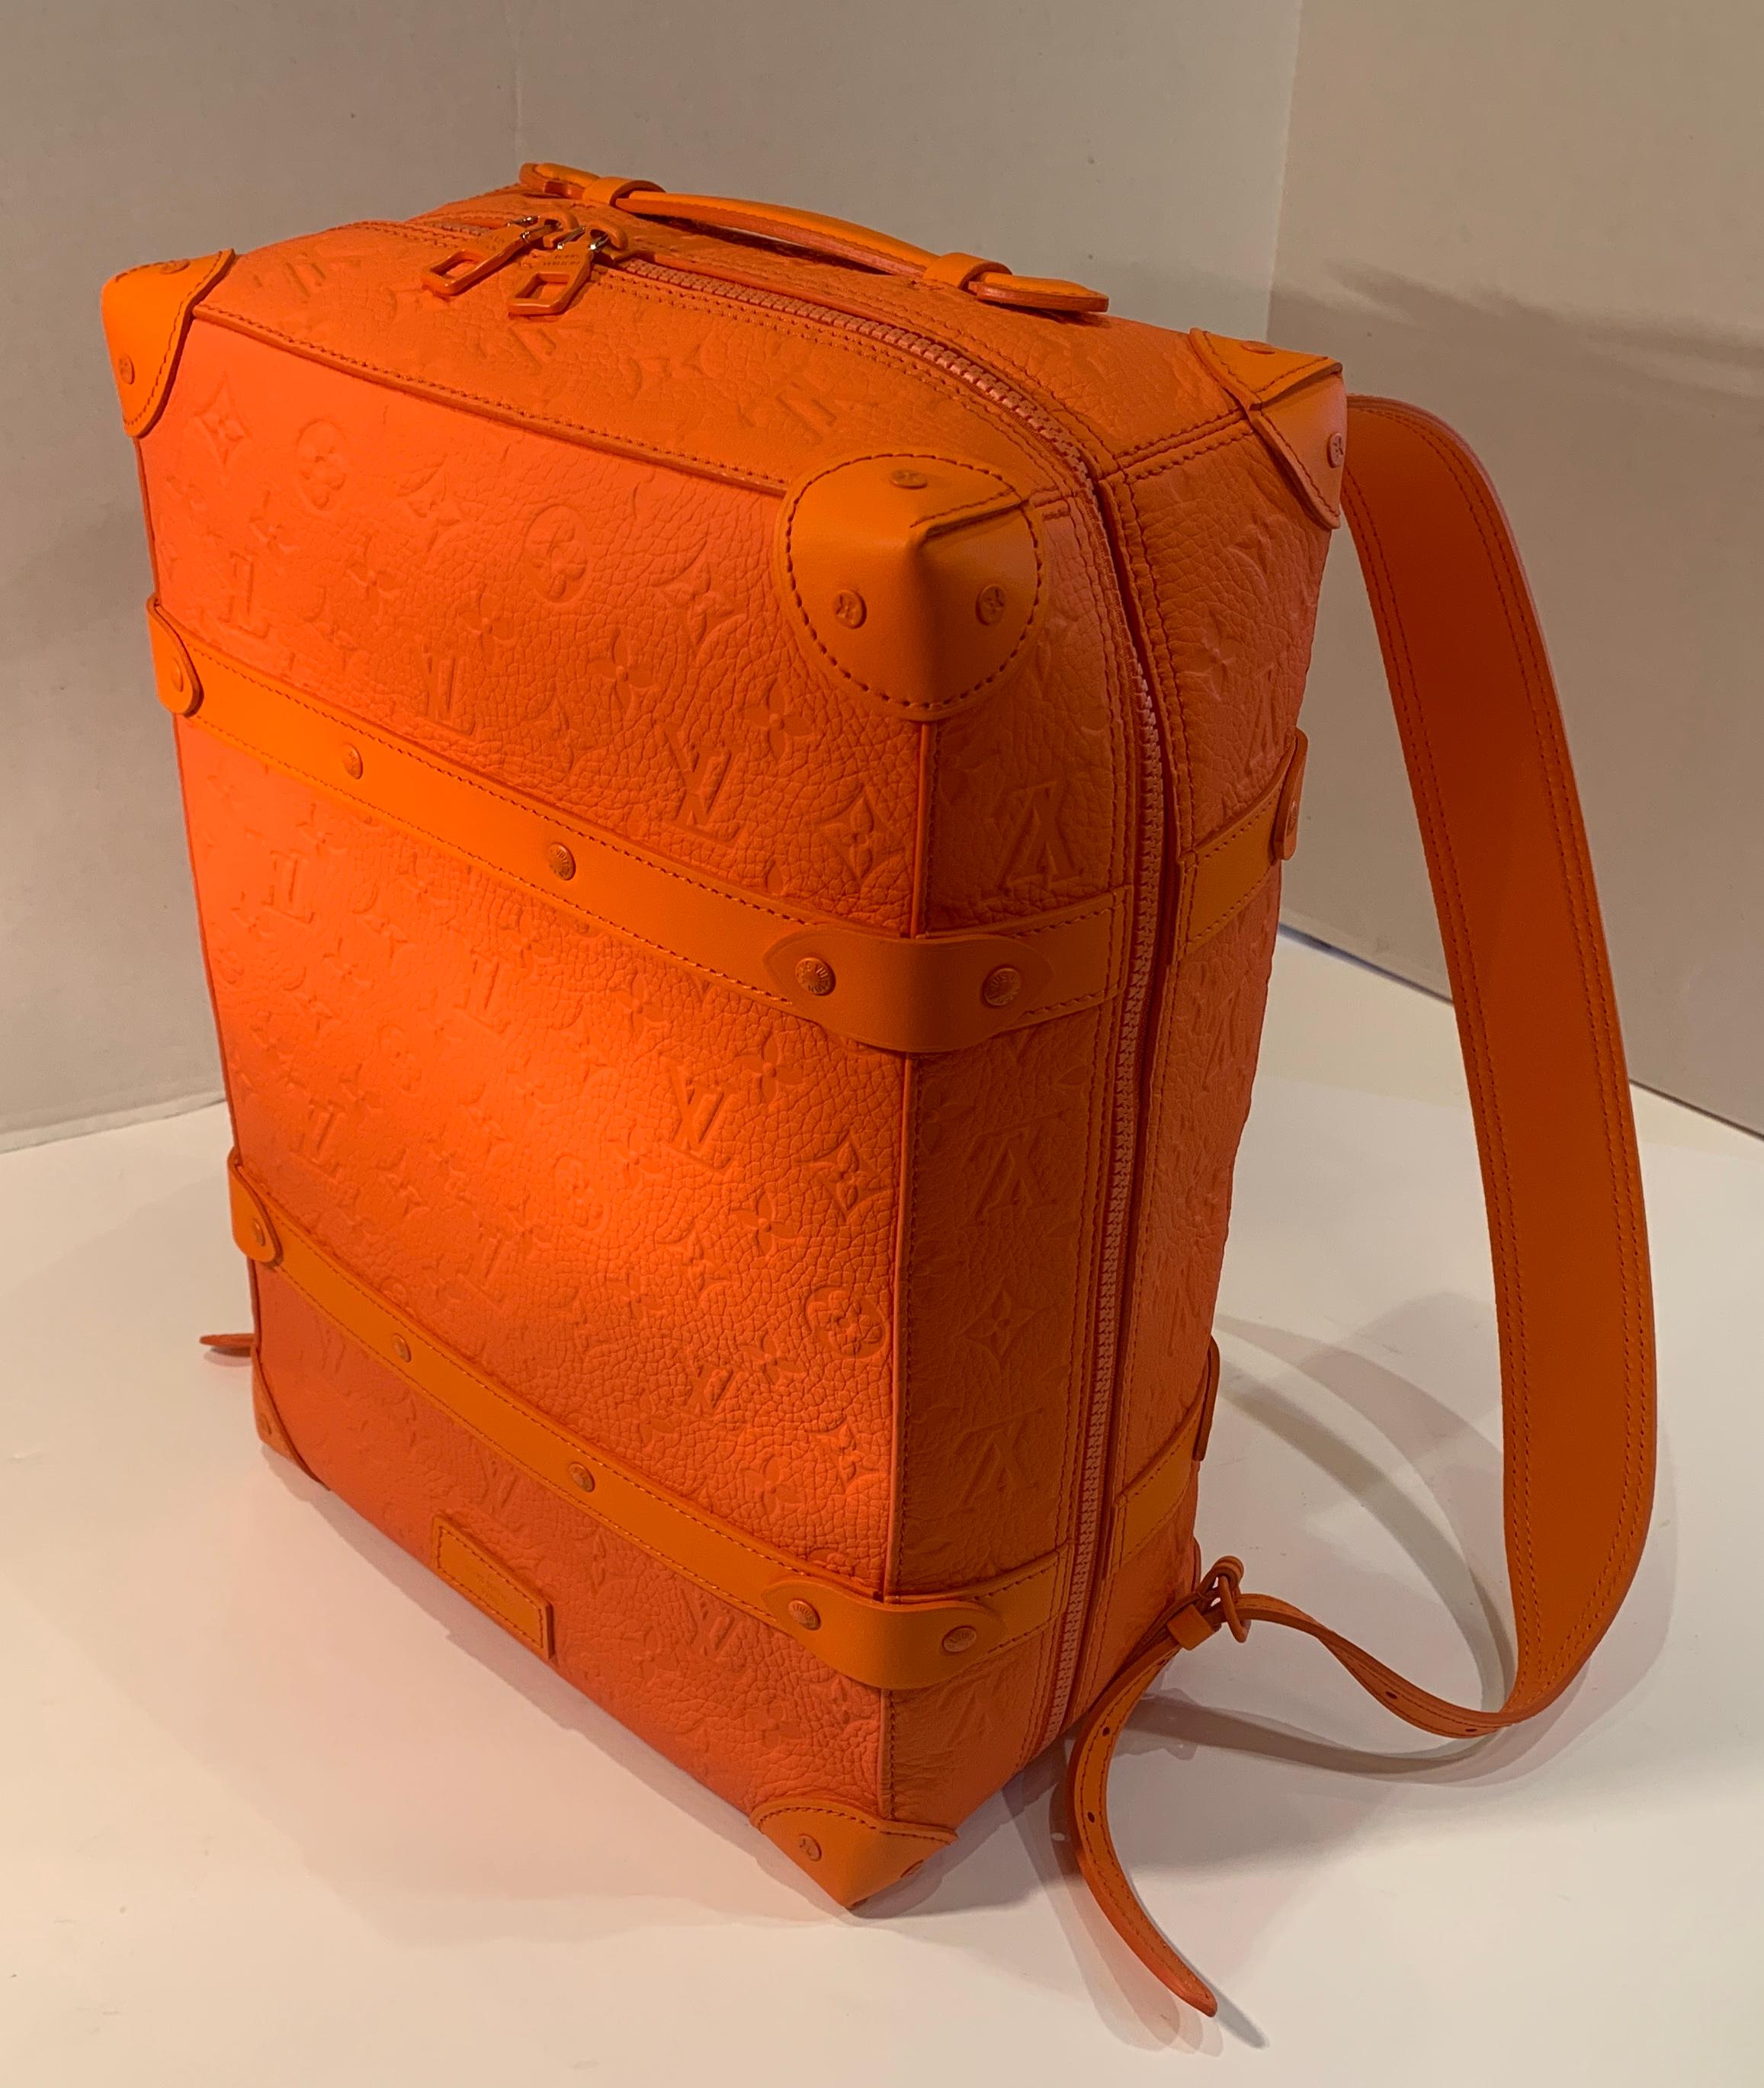 SOLD OUT Louis Vuitton Virgil Abloh Figures of Speech Orange Soft Trunk Backpack 2